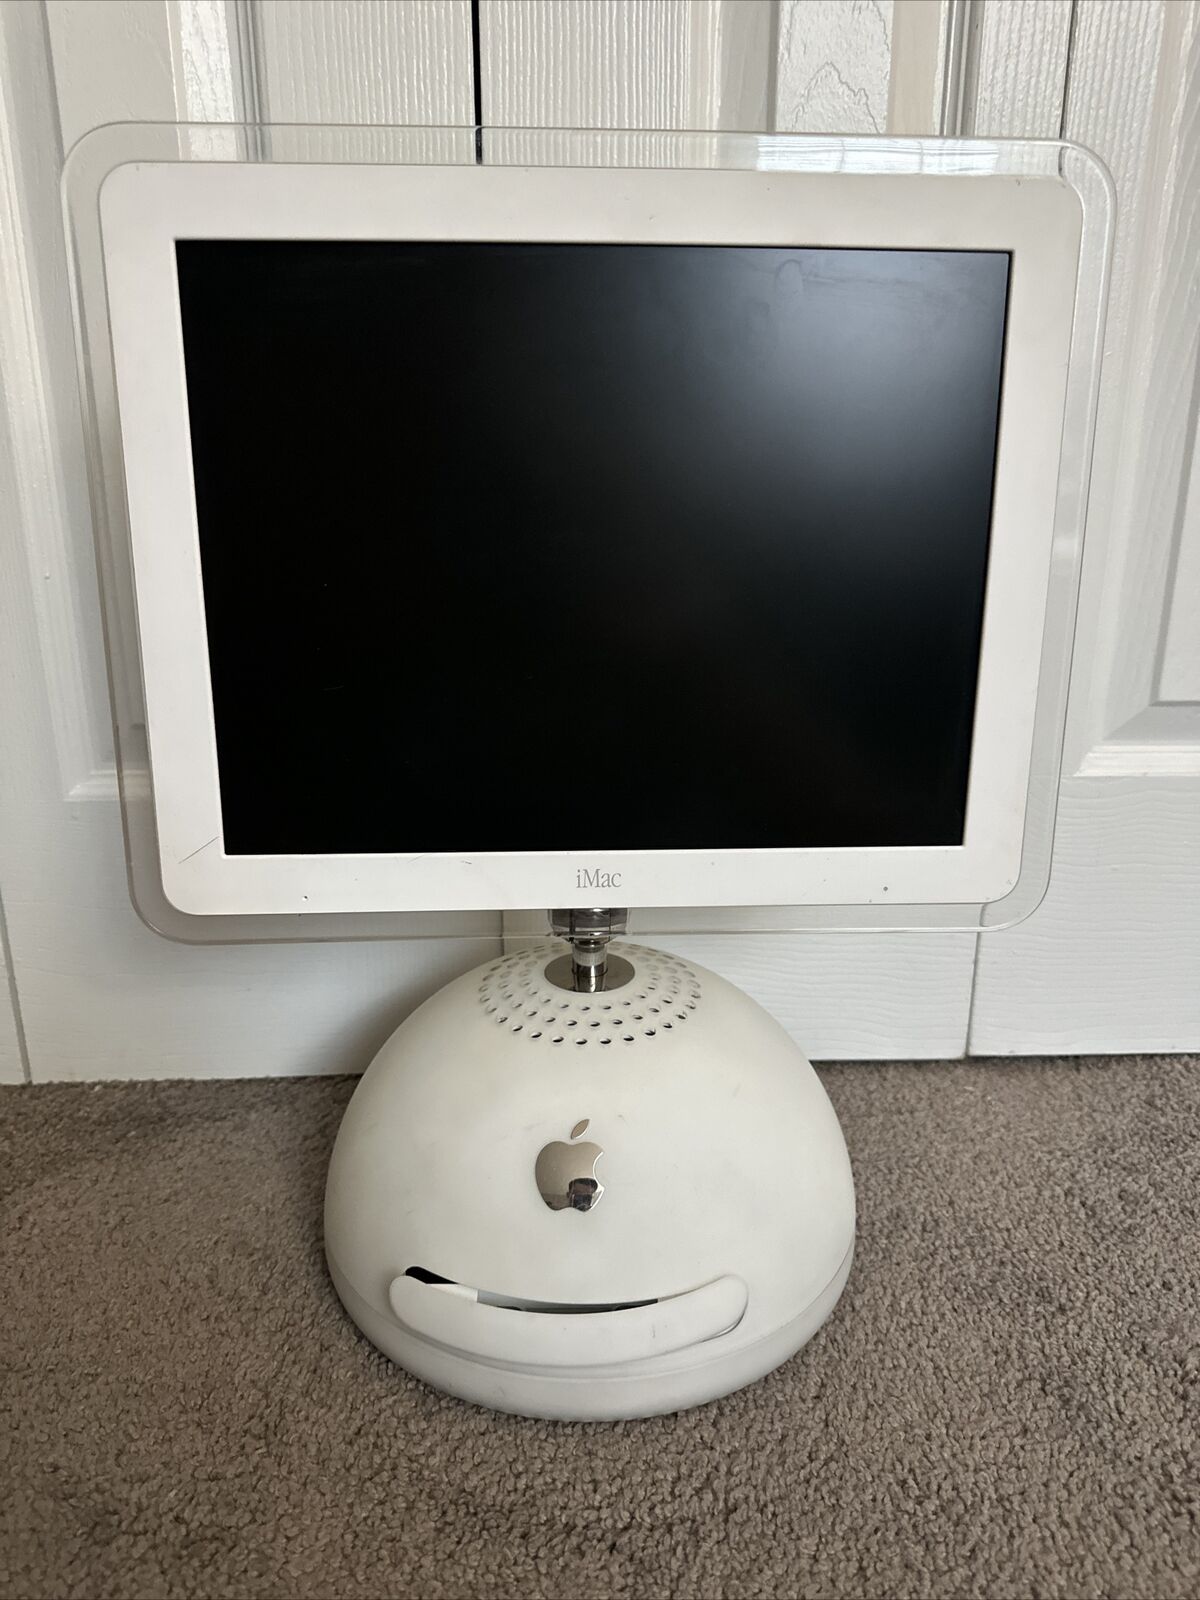 Vintage Apple iMac G4 M6498 15” 256 MB 700MHz Collectable UNTESTED FOR PARTS